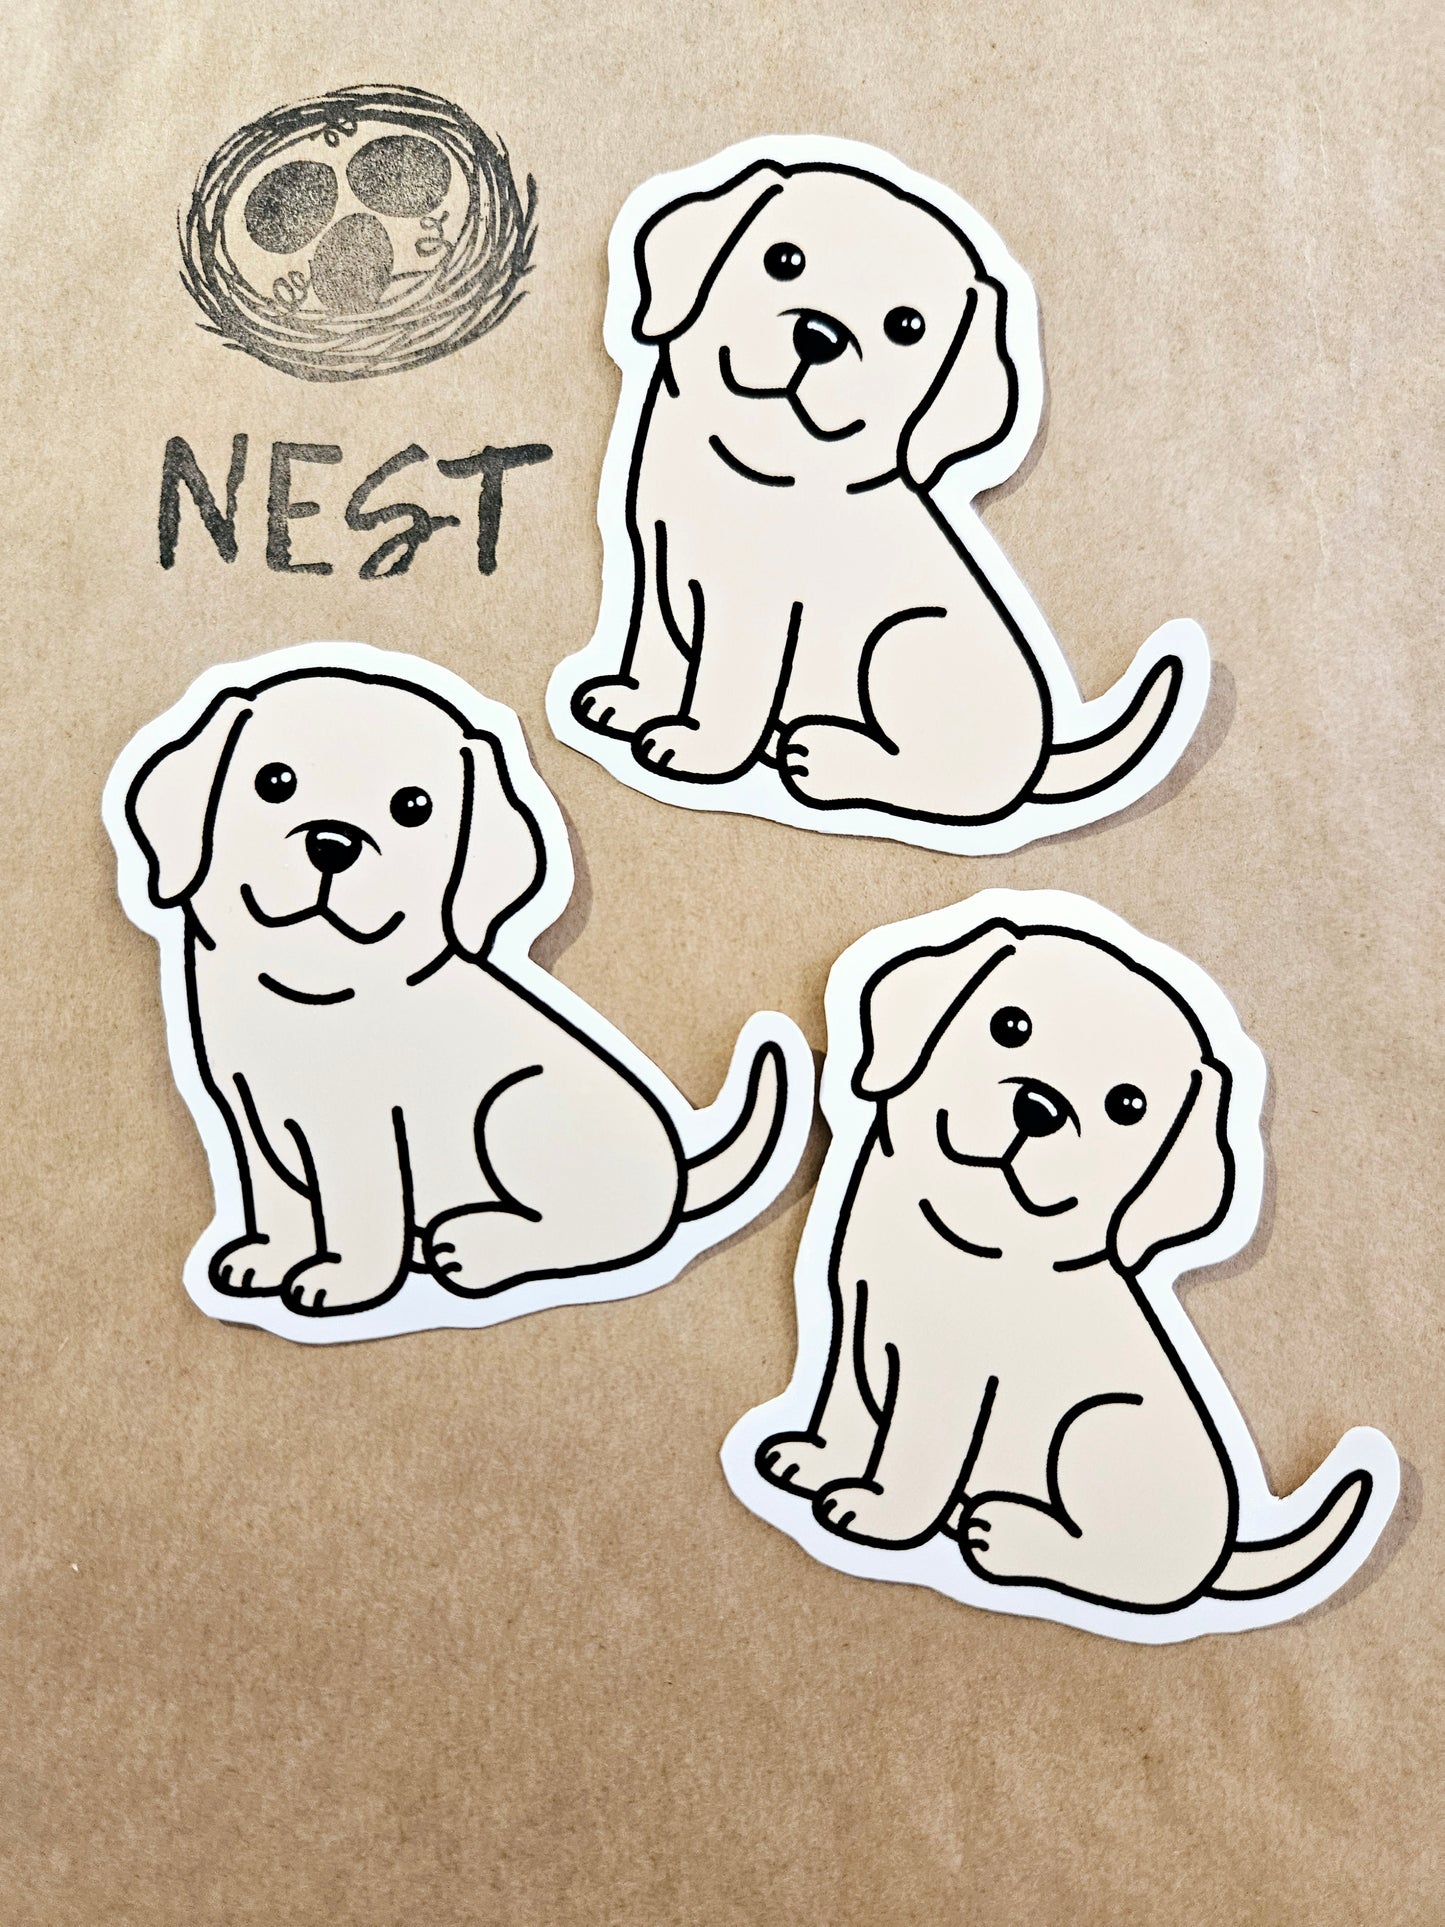 Crouton the Corgi and Friends: Vinyl Stickers by Mel